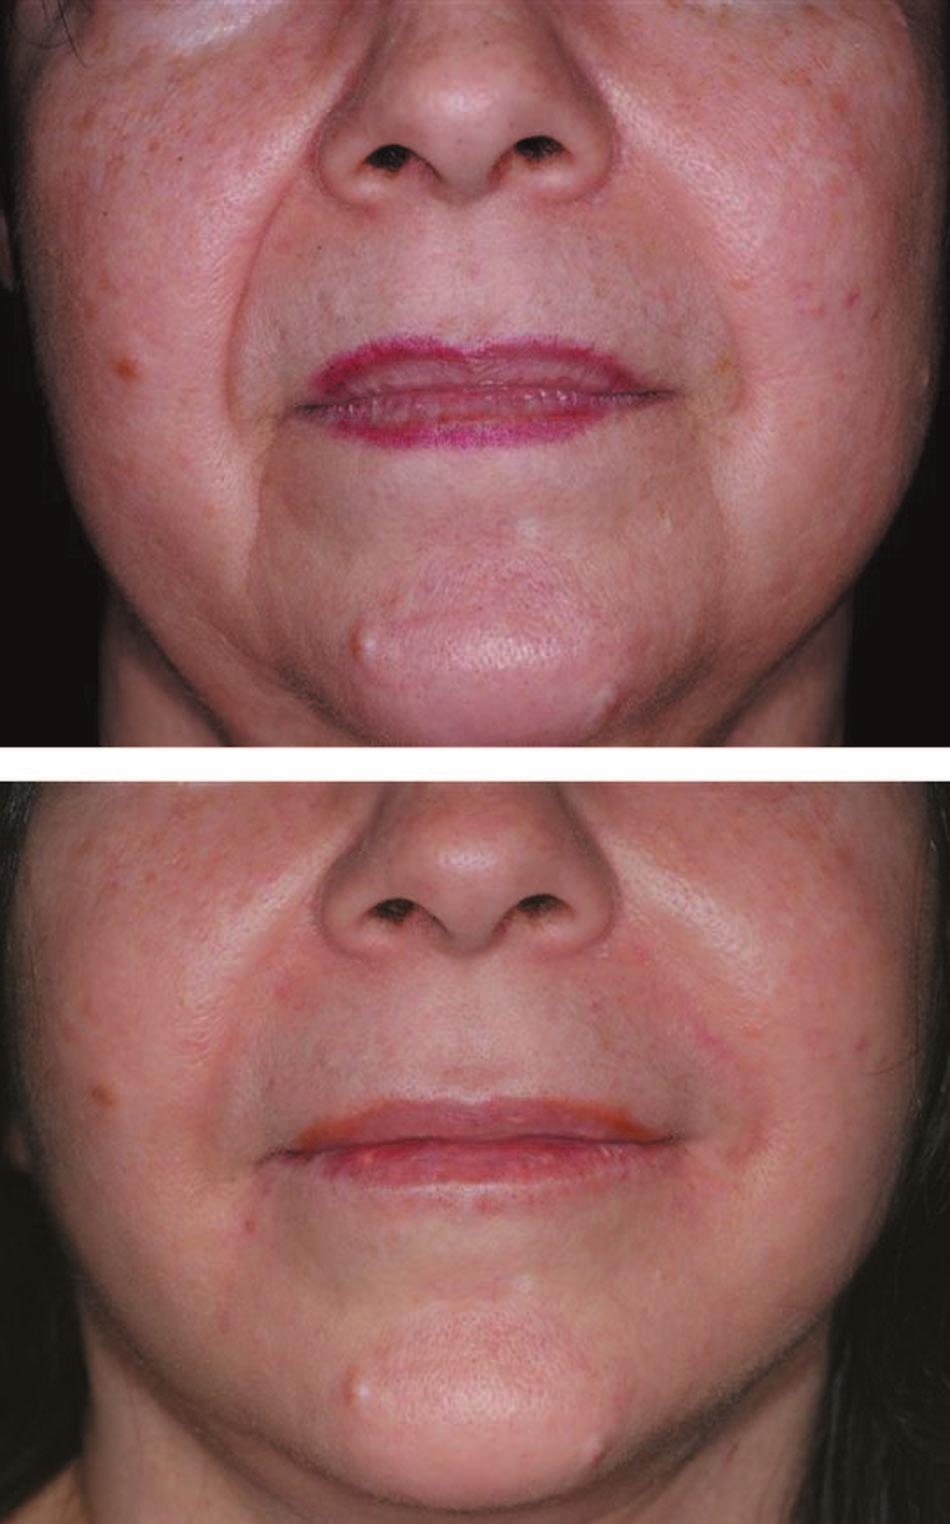 Plastic and Reconstructive Surgery November Supplement 2007 Fig. 8. A 73-year-old woman before and 3 months after injection of 3.